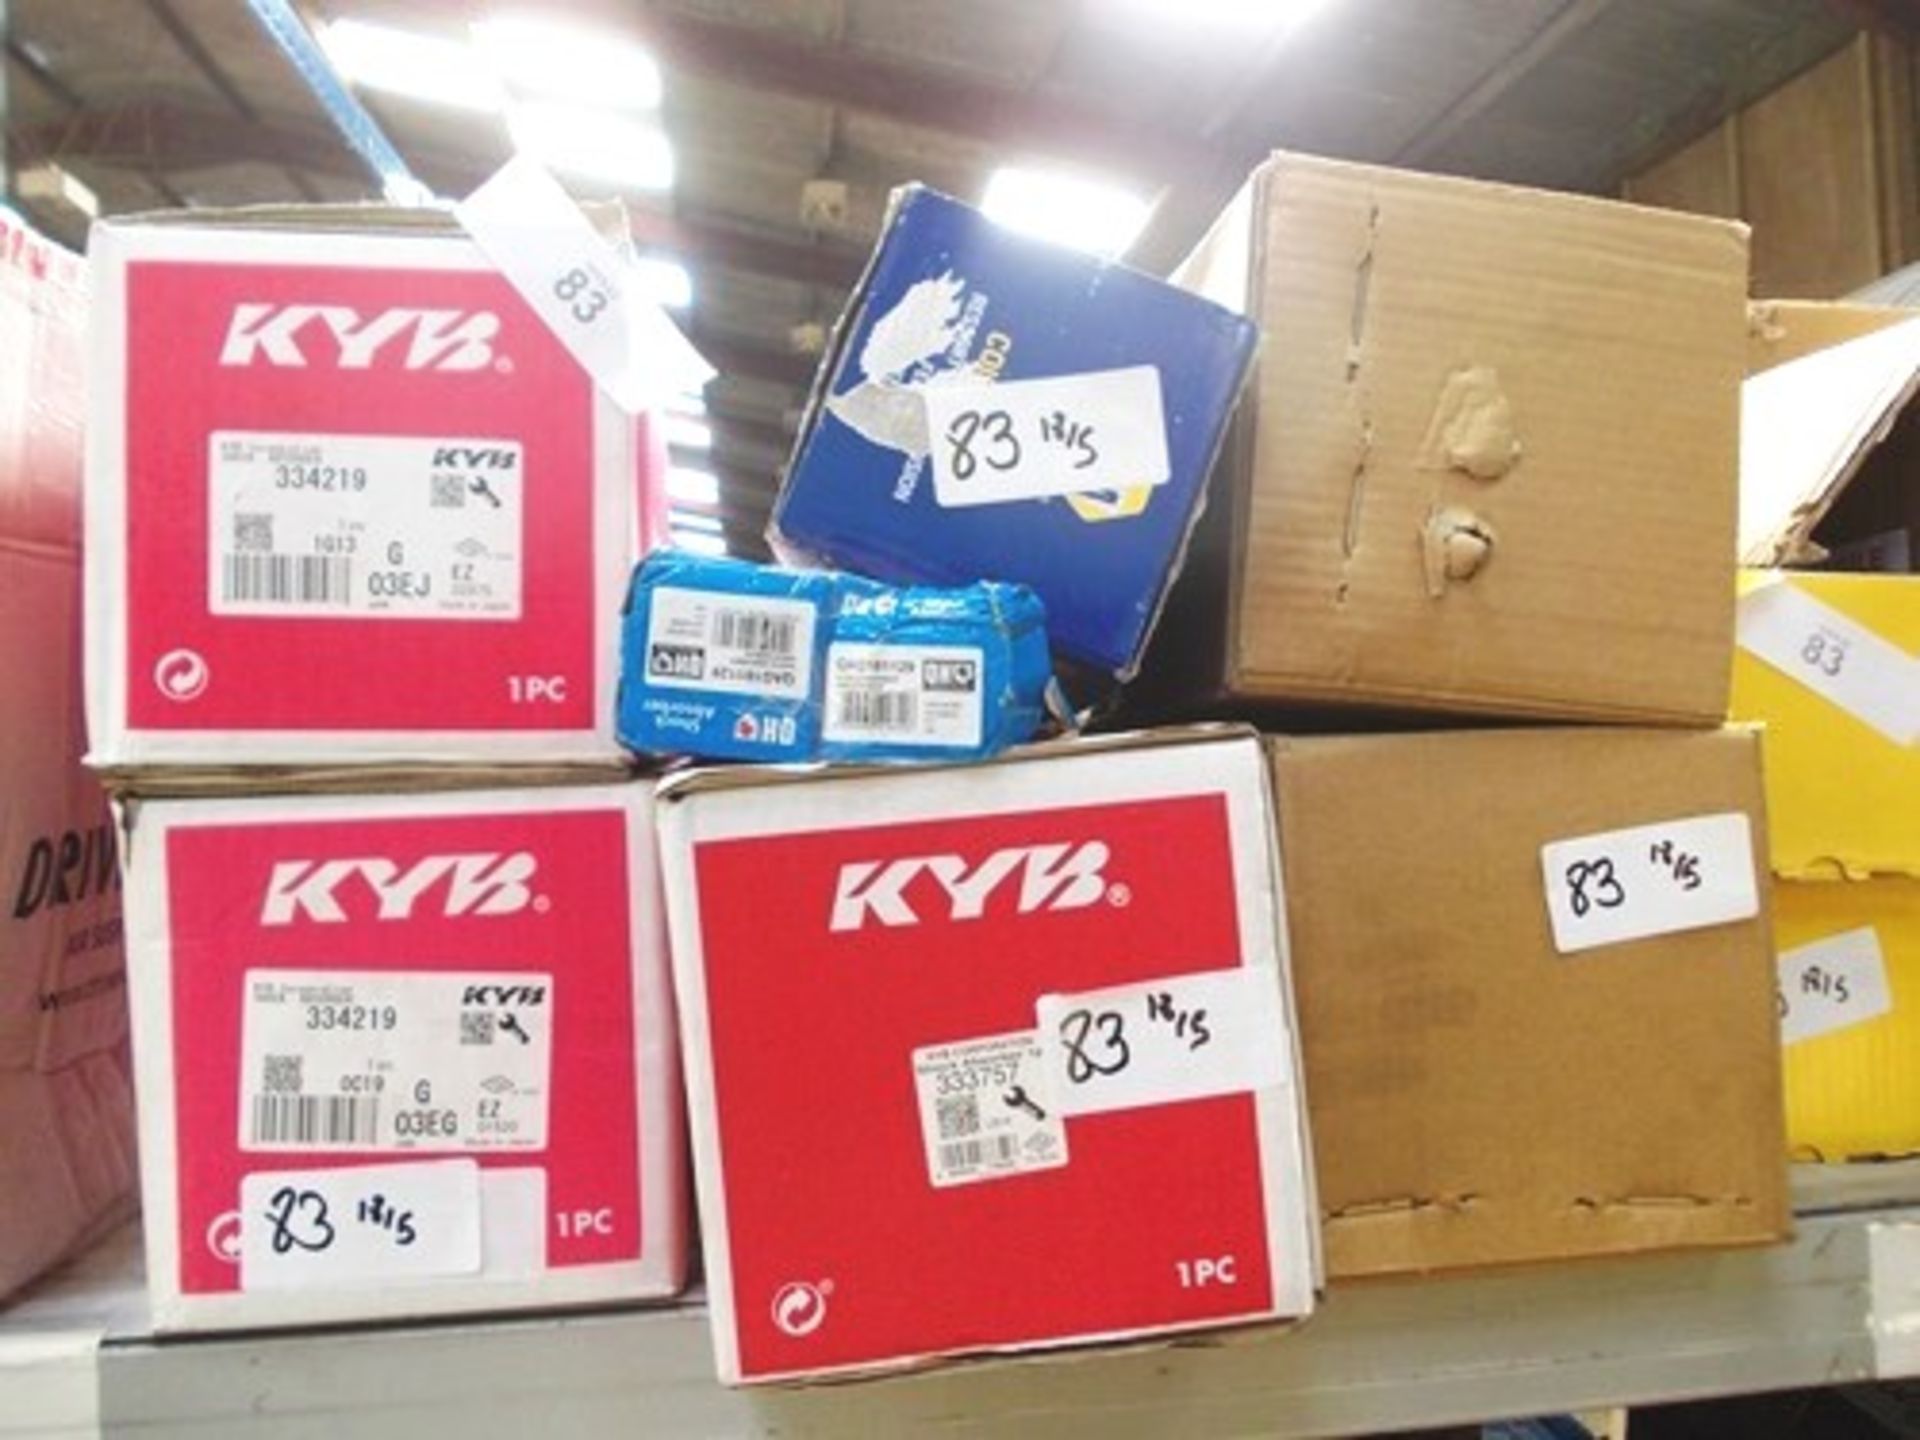 A selection of suspension parts including KYB shock absorbers, Ref: 334219 and 333757, Qunitock